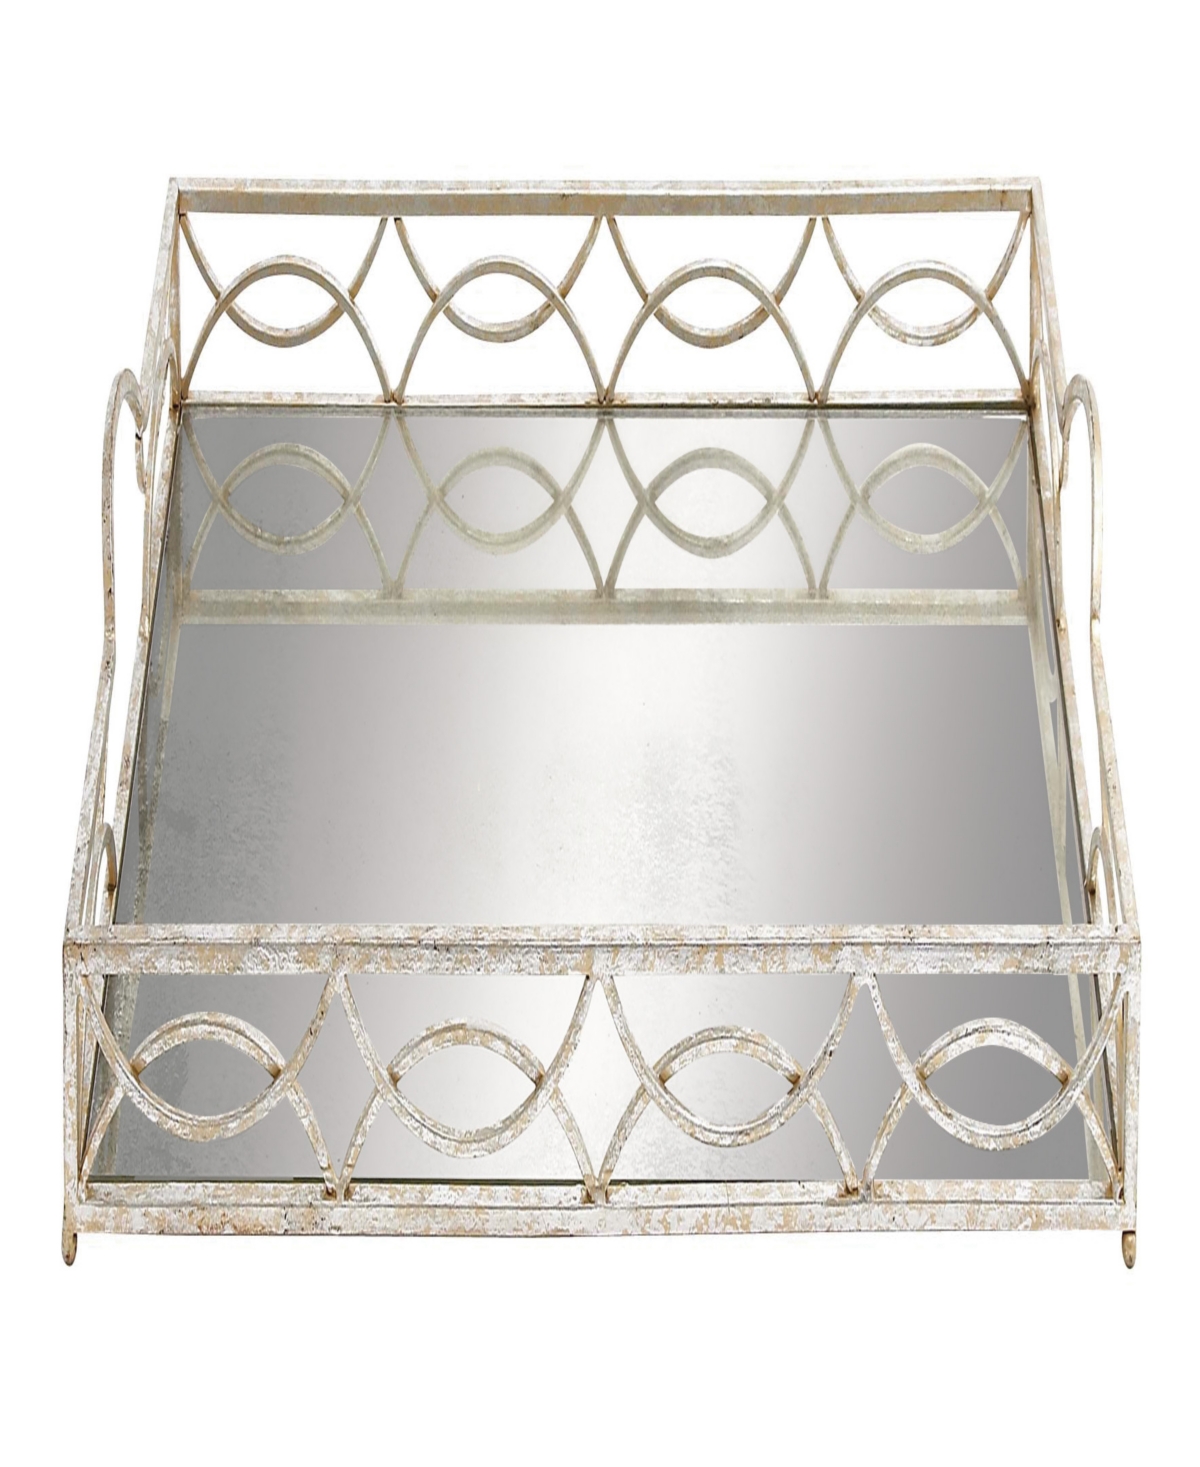 Rosemary Lane Metal Mirrored Tray, 25" X 15" X 5" In Silver